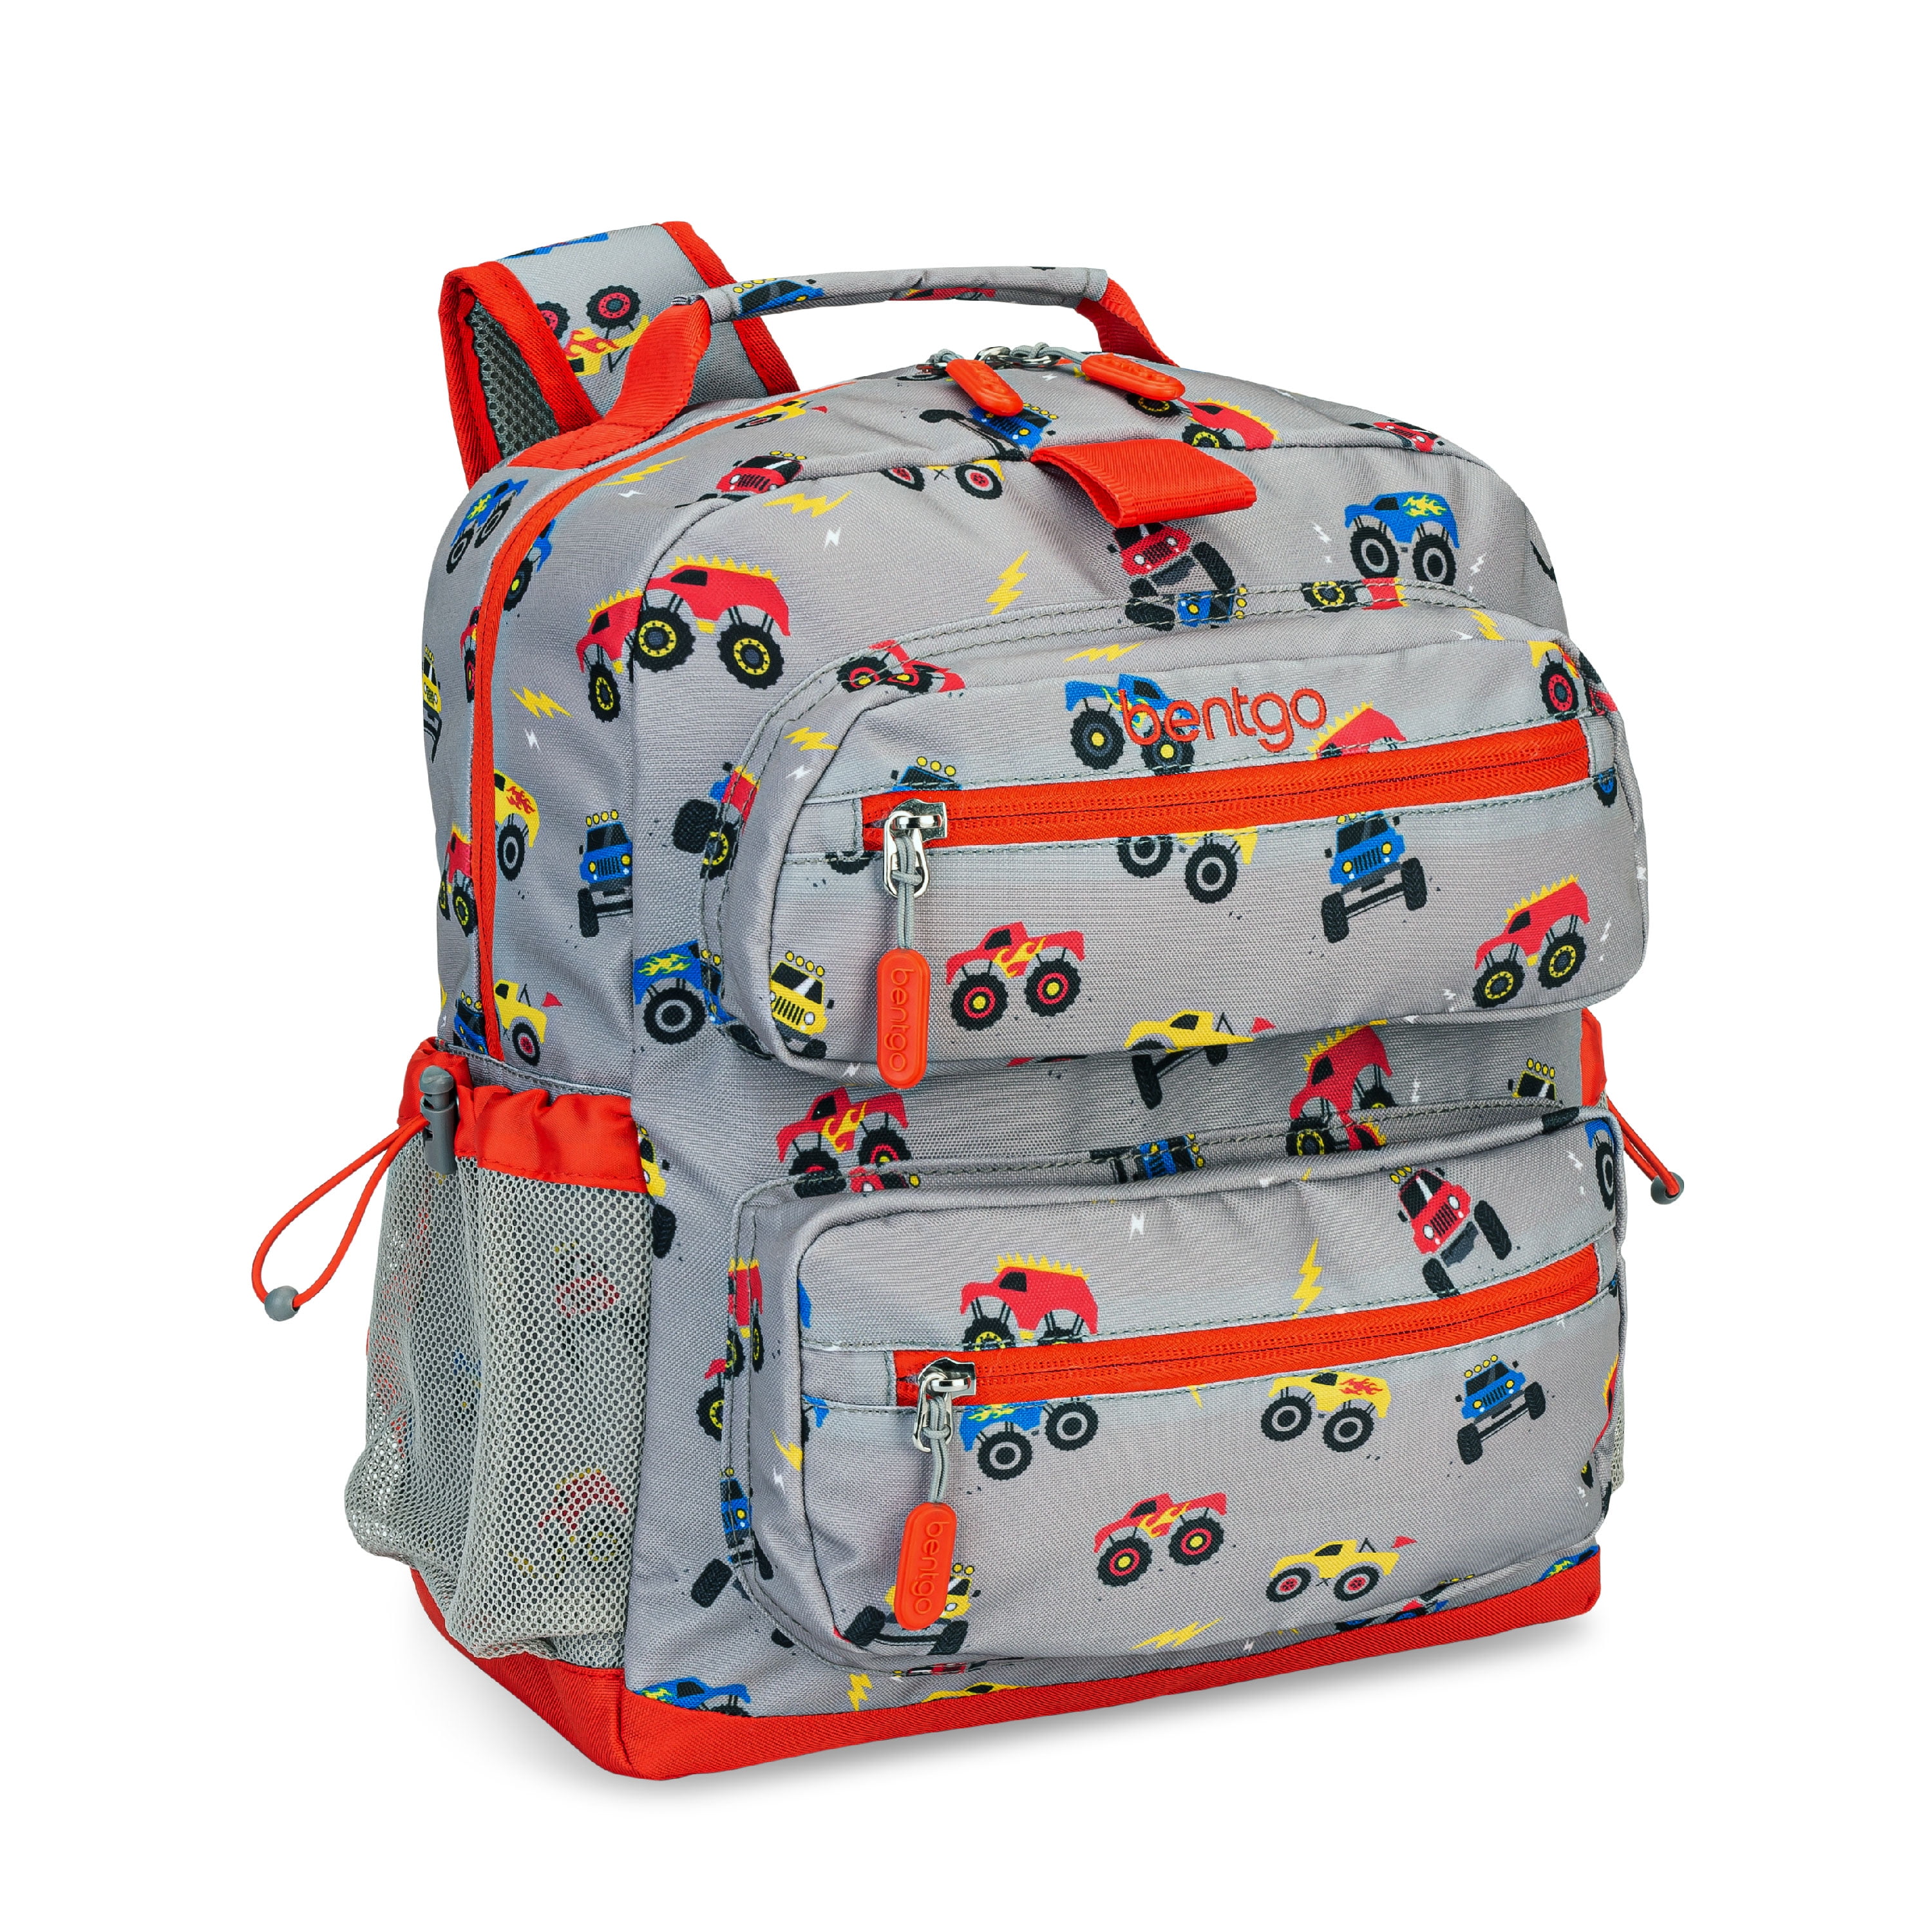 Bentgo Kids Backpack - Confetti Edition Designed Lightweight 14” Backpack for School, Travel & Daycare - Roomy Interior, Durable & Water-Resistant